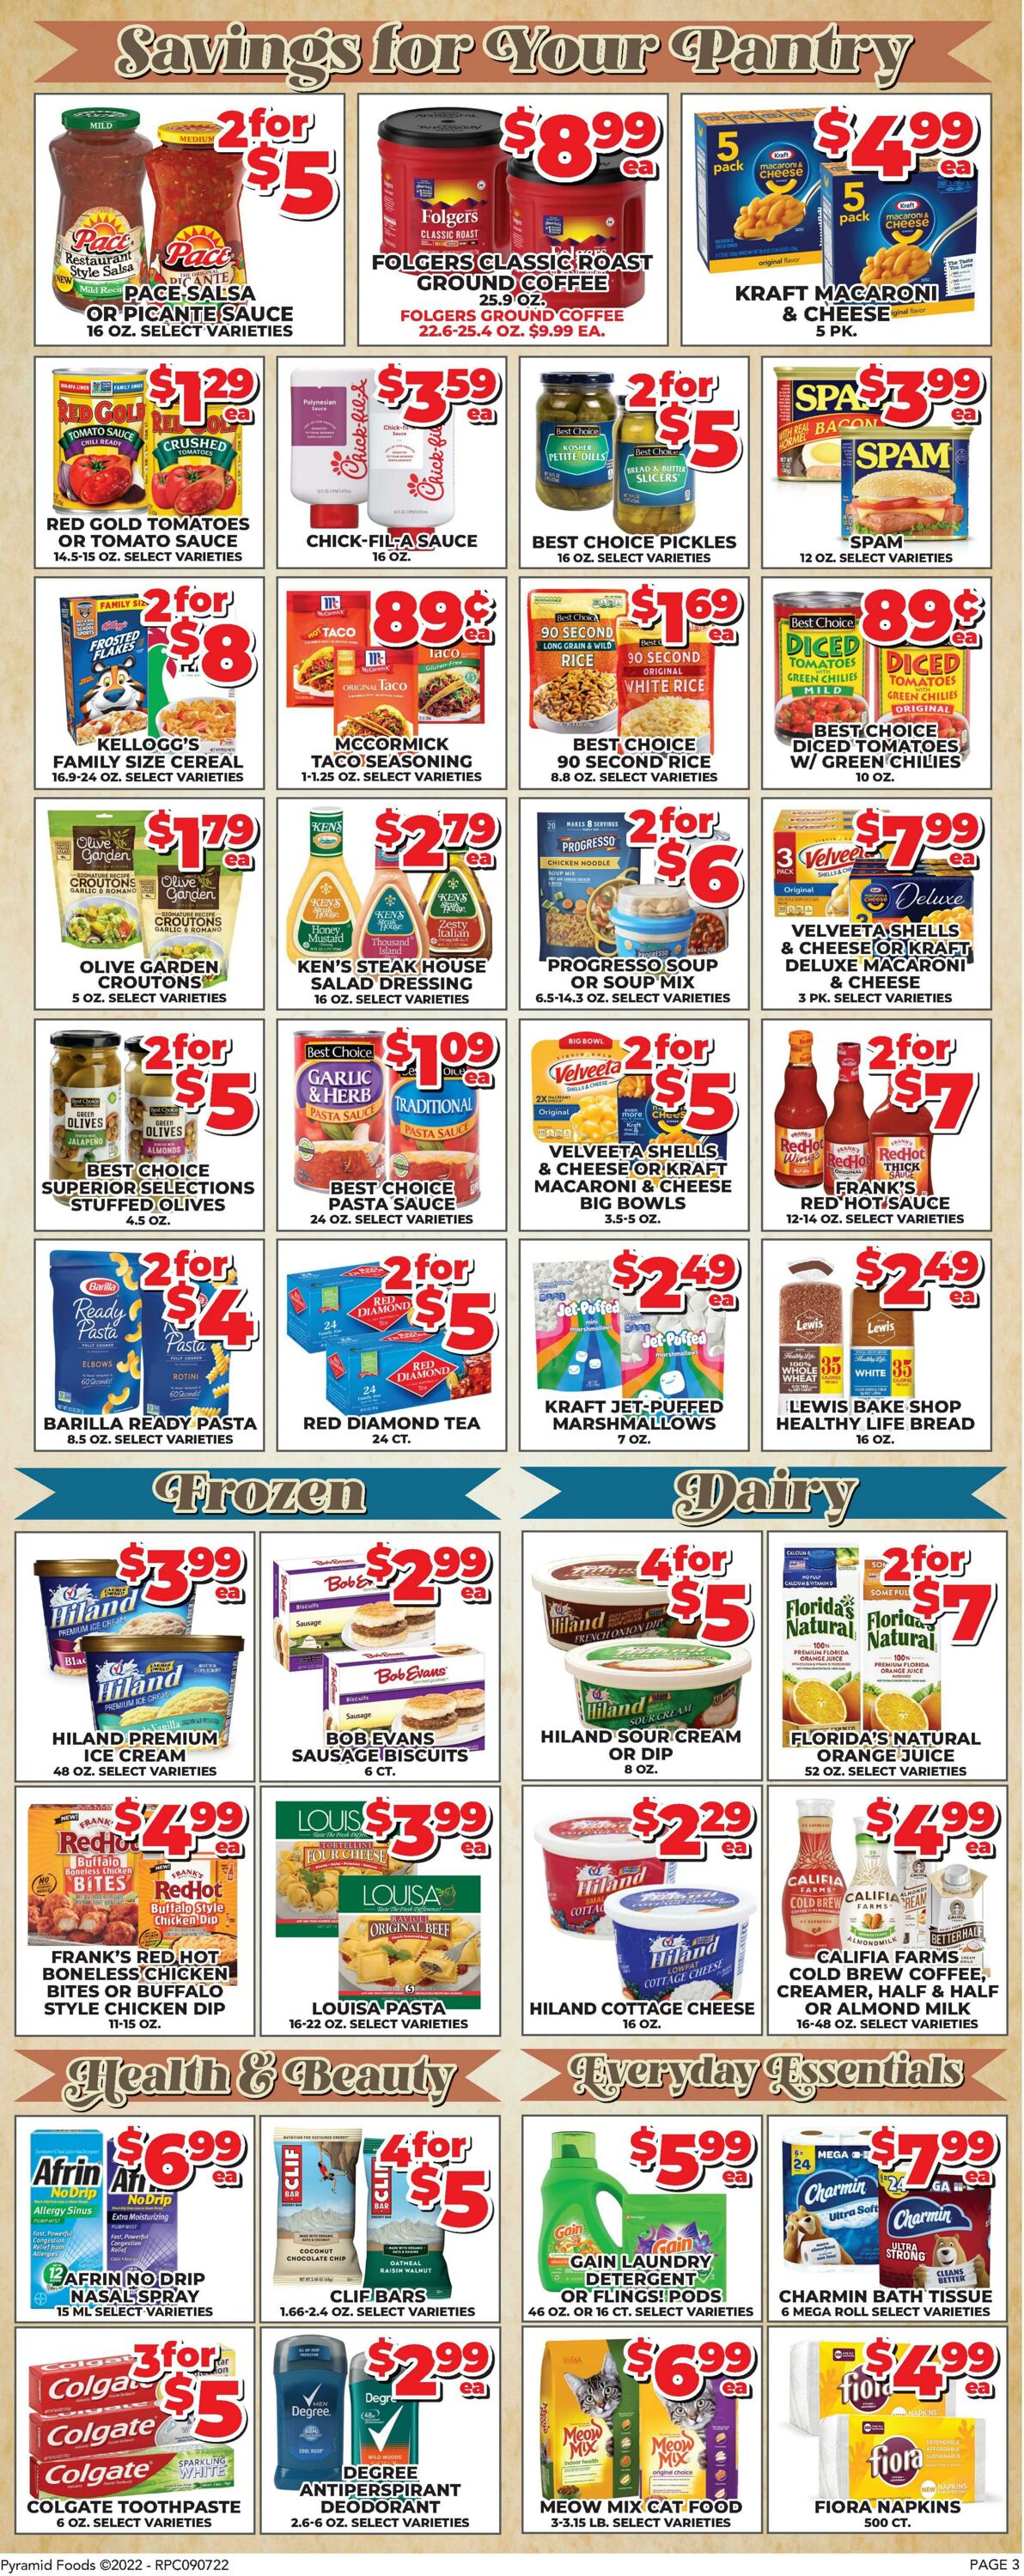 Weekly ad Price Cutter 09/07/2022 - 09/13/2022